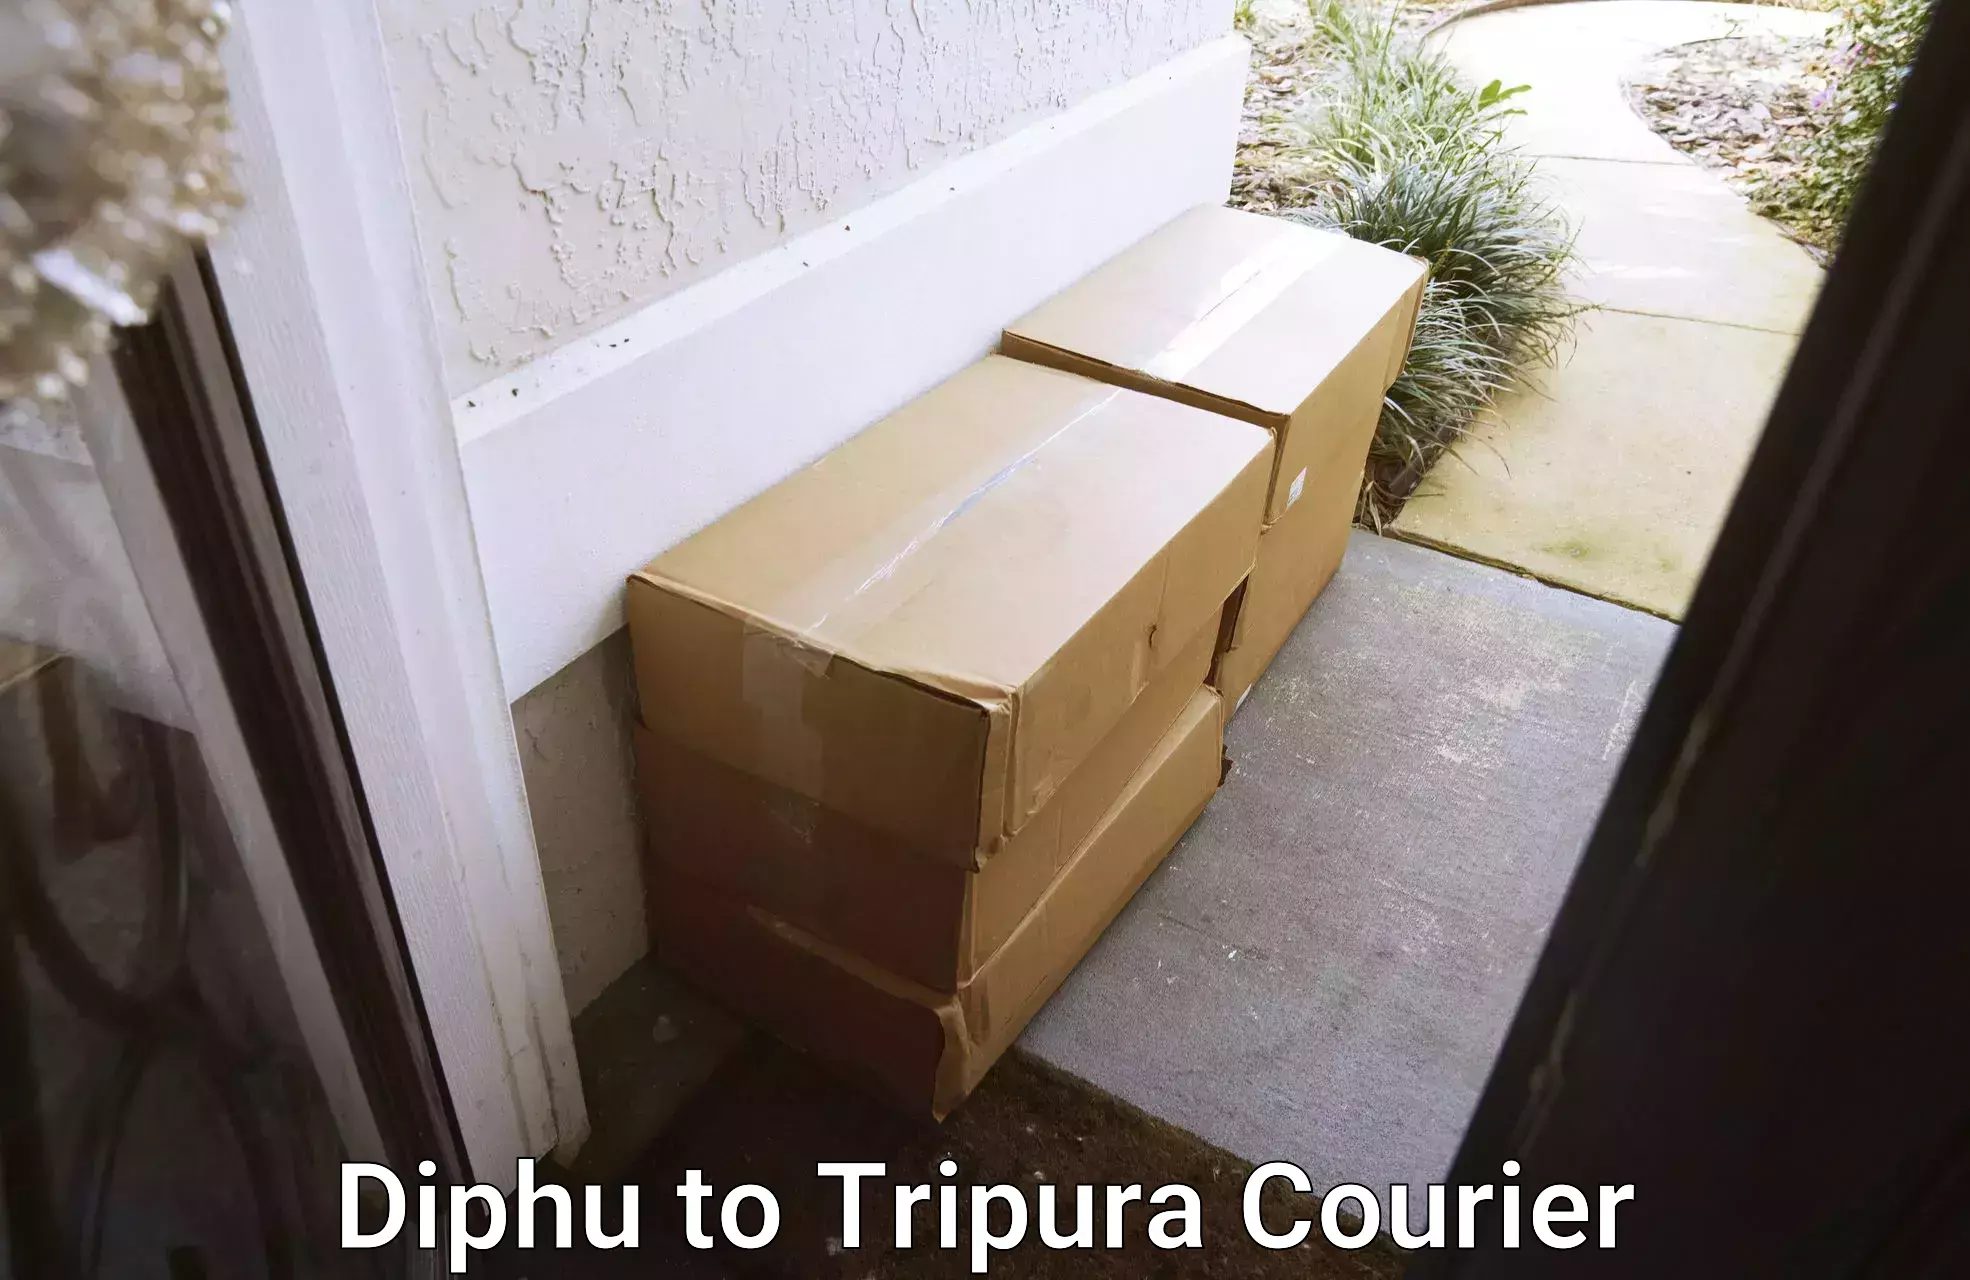 On-demand courier Diphu to Kailashahar